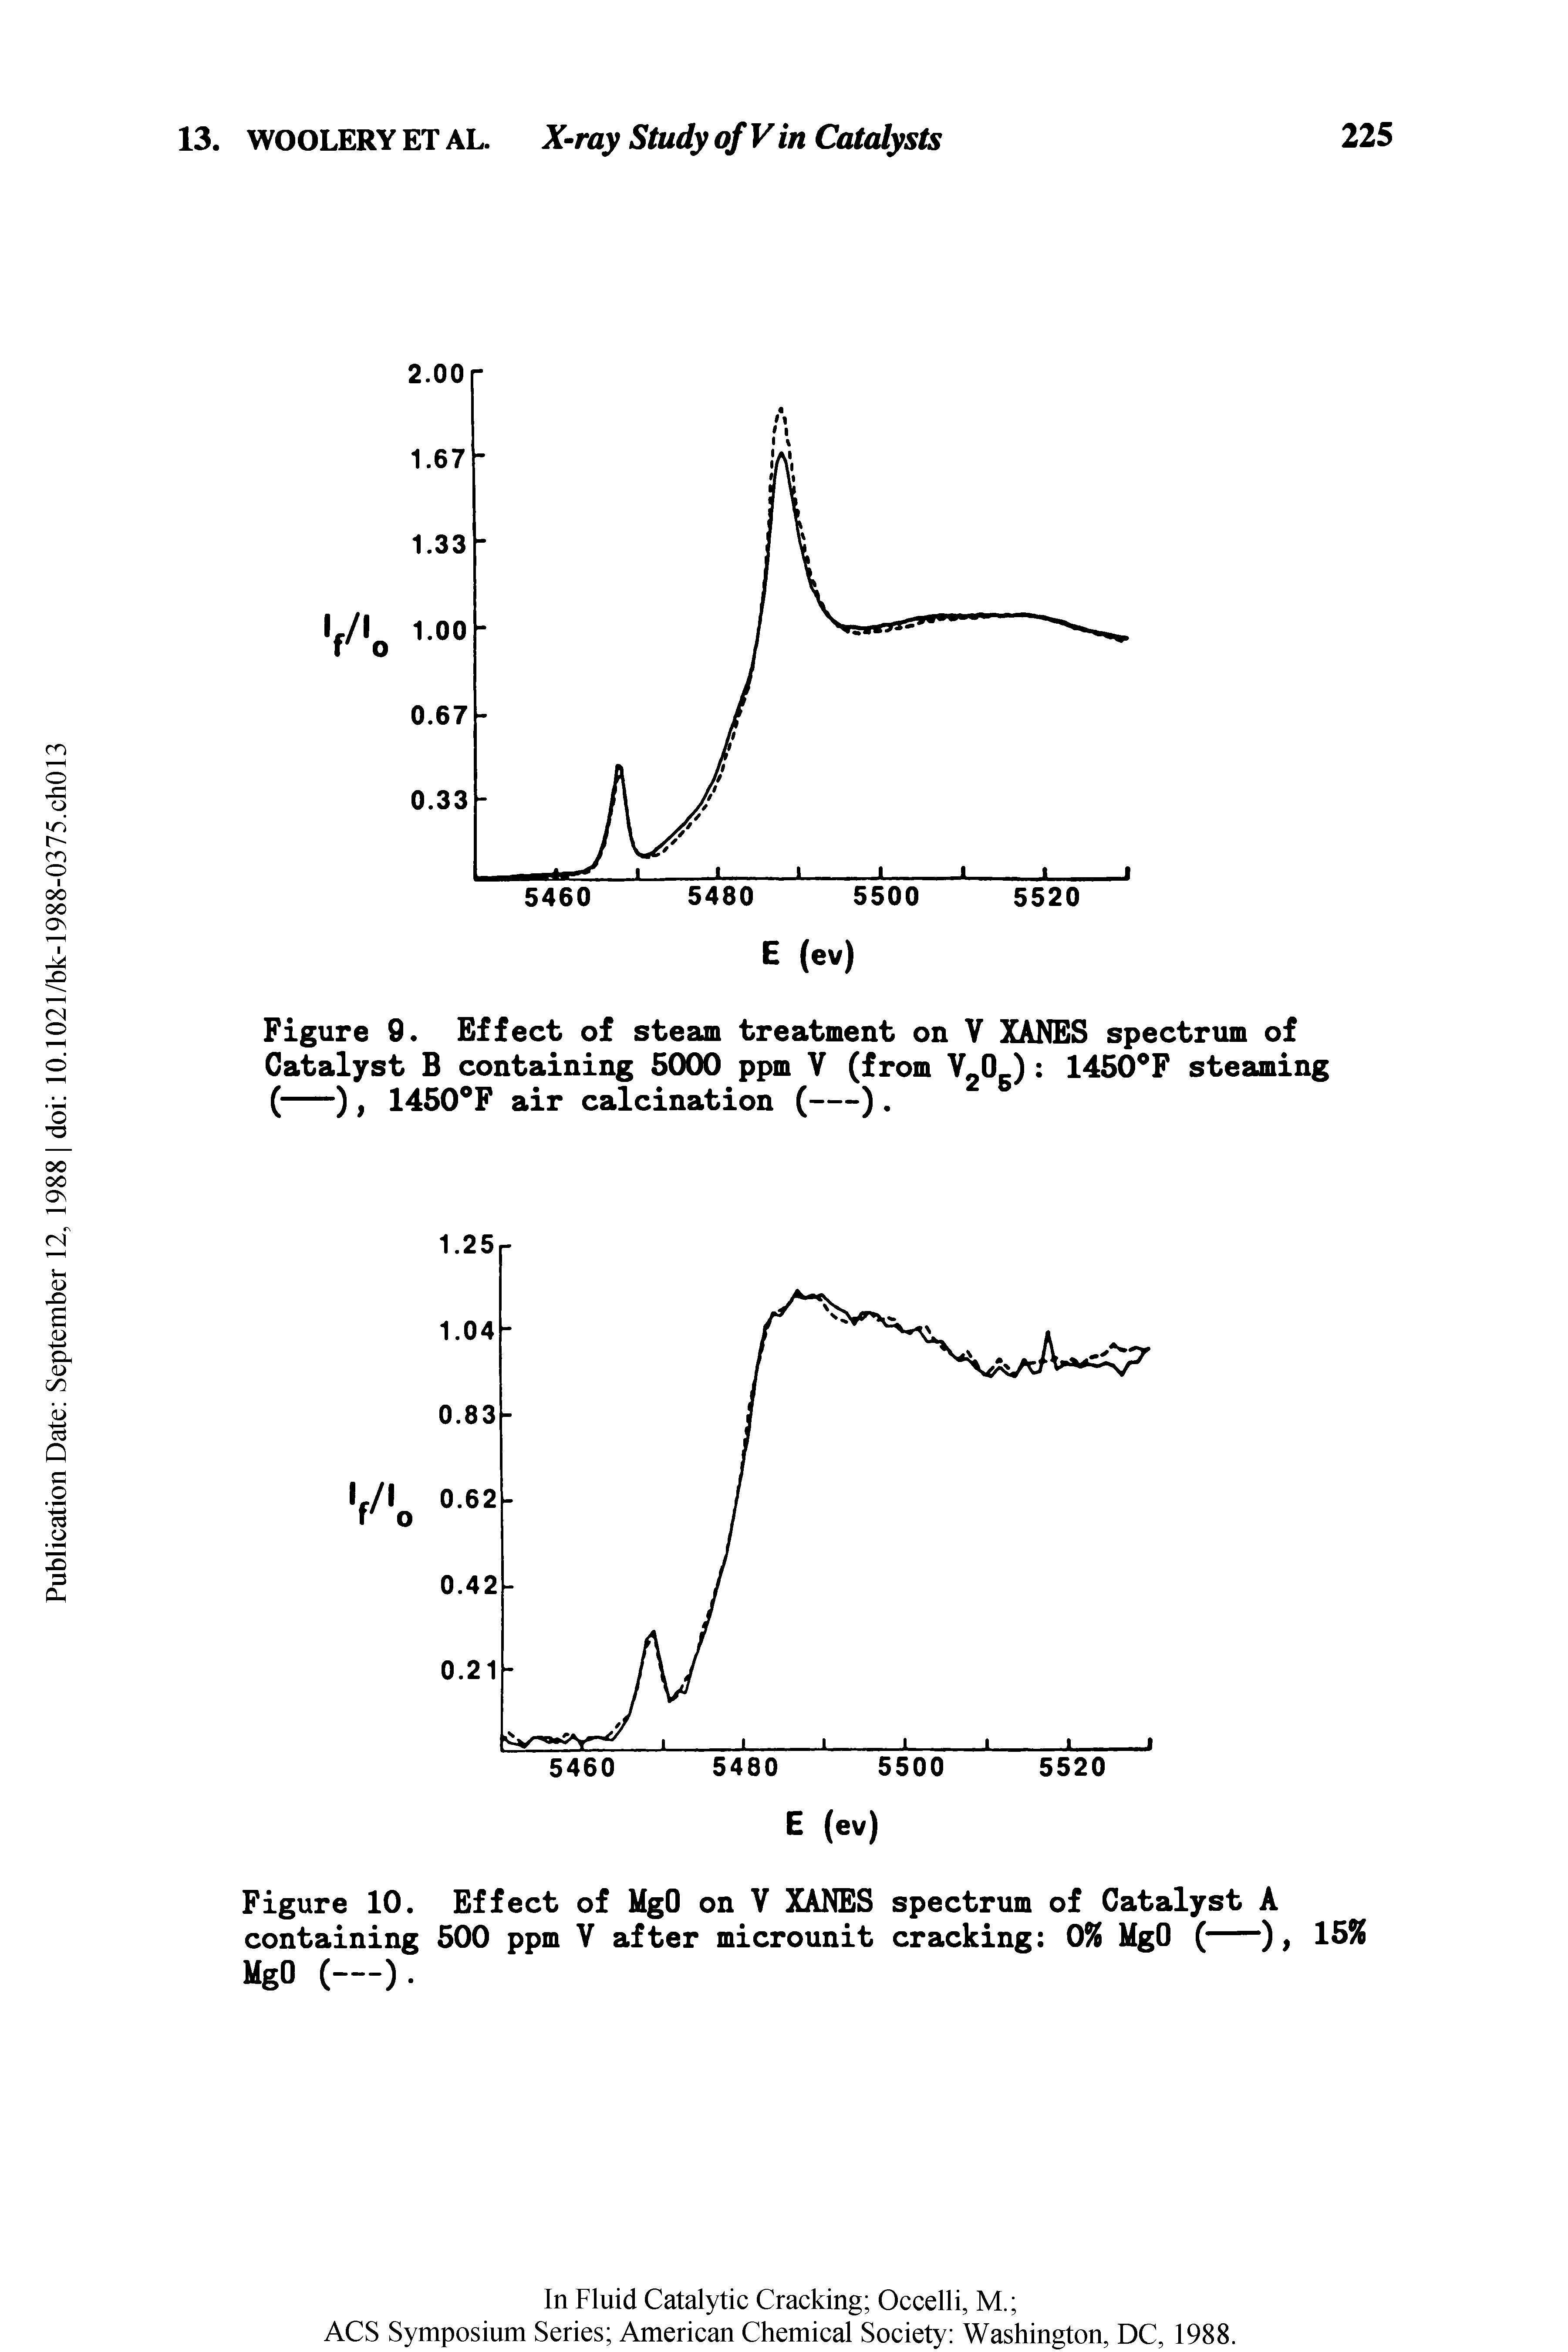 Figure 9. Effect of steam treatment on V XANES spectrum of Catalyst B containing 5000 ppm V (from V 0 ) 1450 F steaming (---), 1450 F air calcination (---).